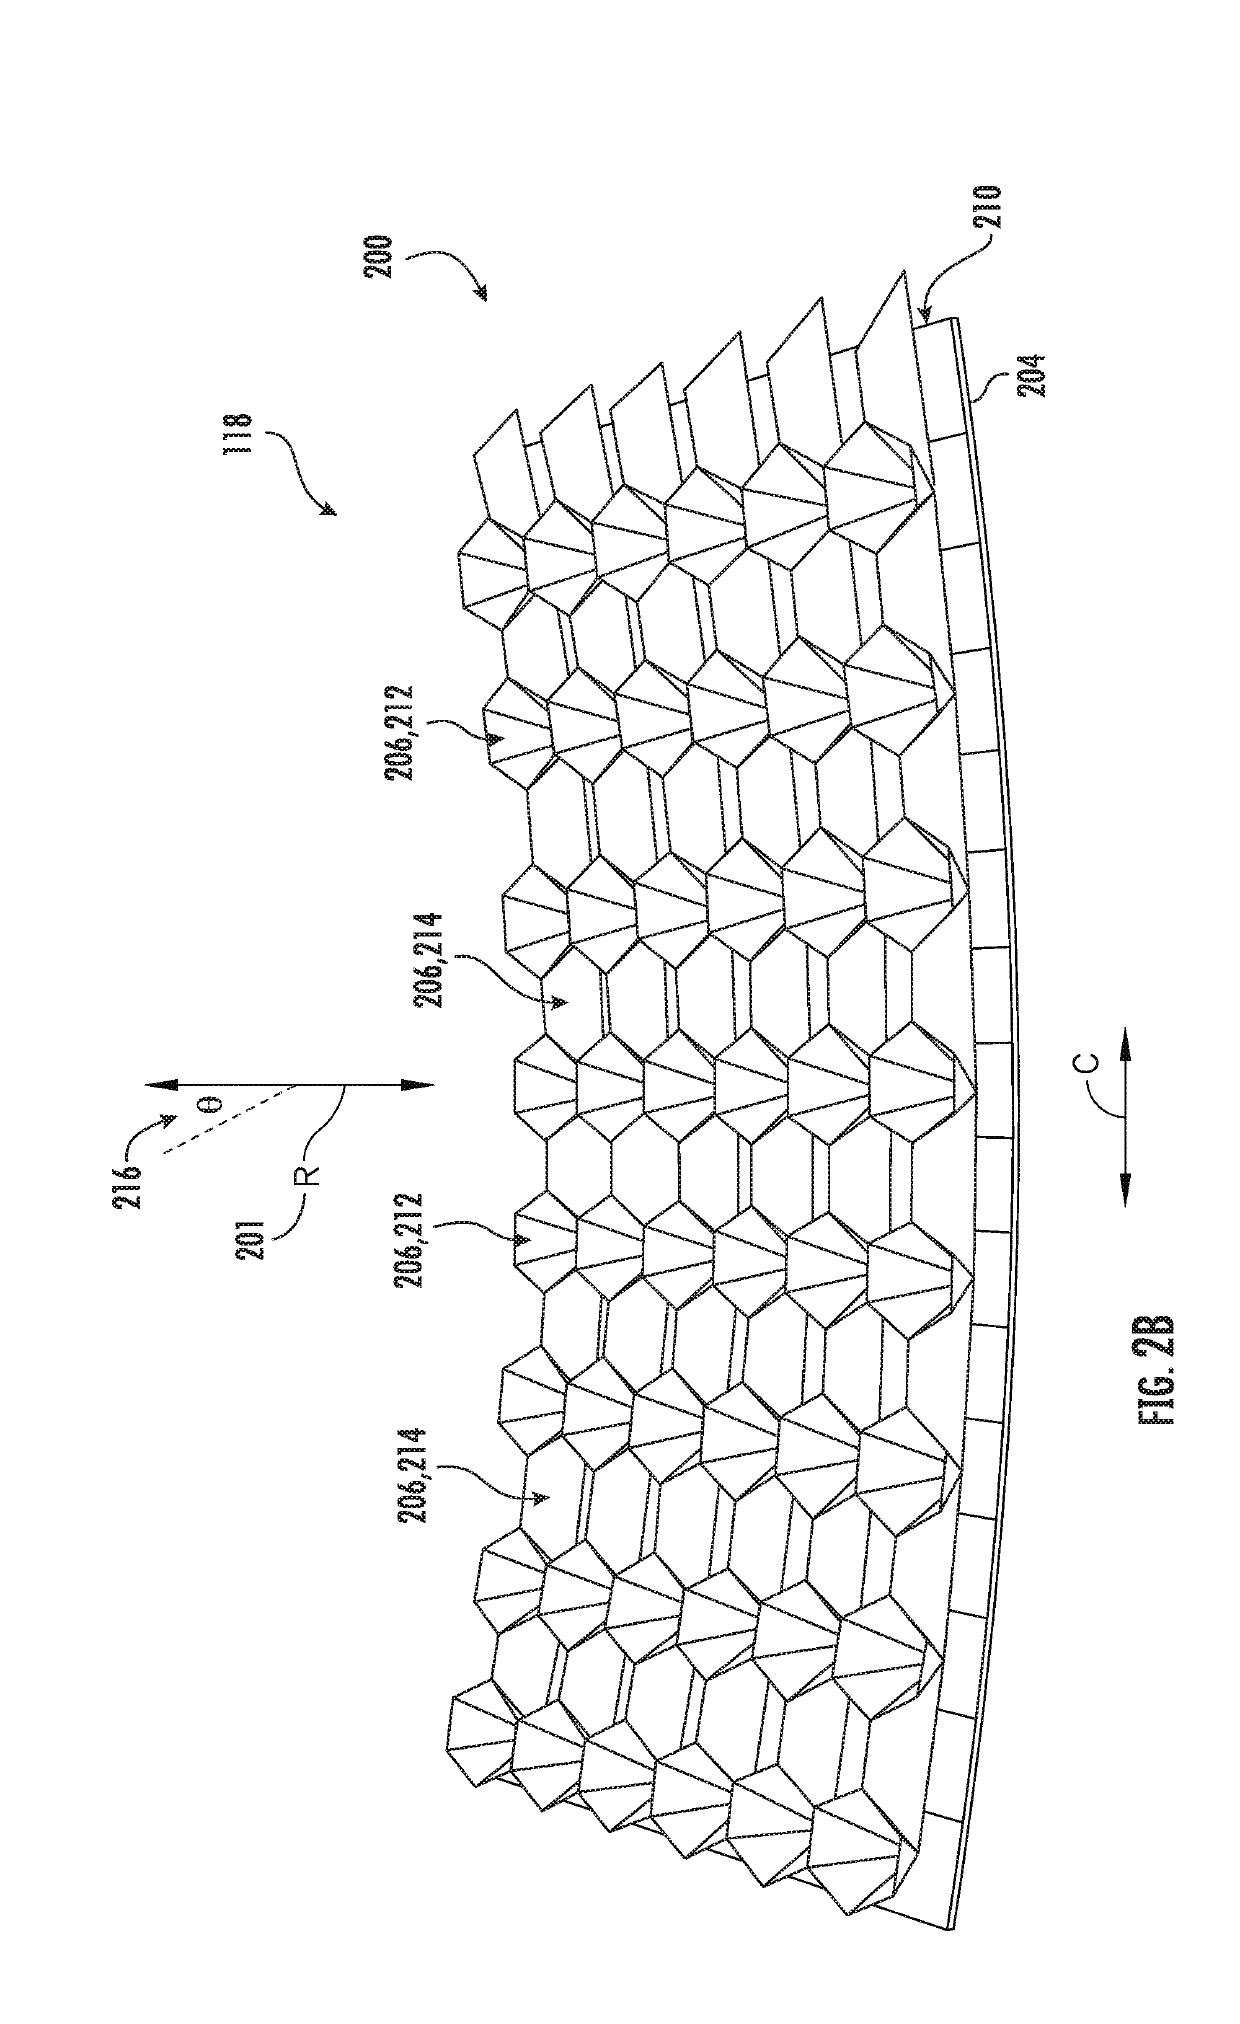 Acoustic liners with oblique cellular structures